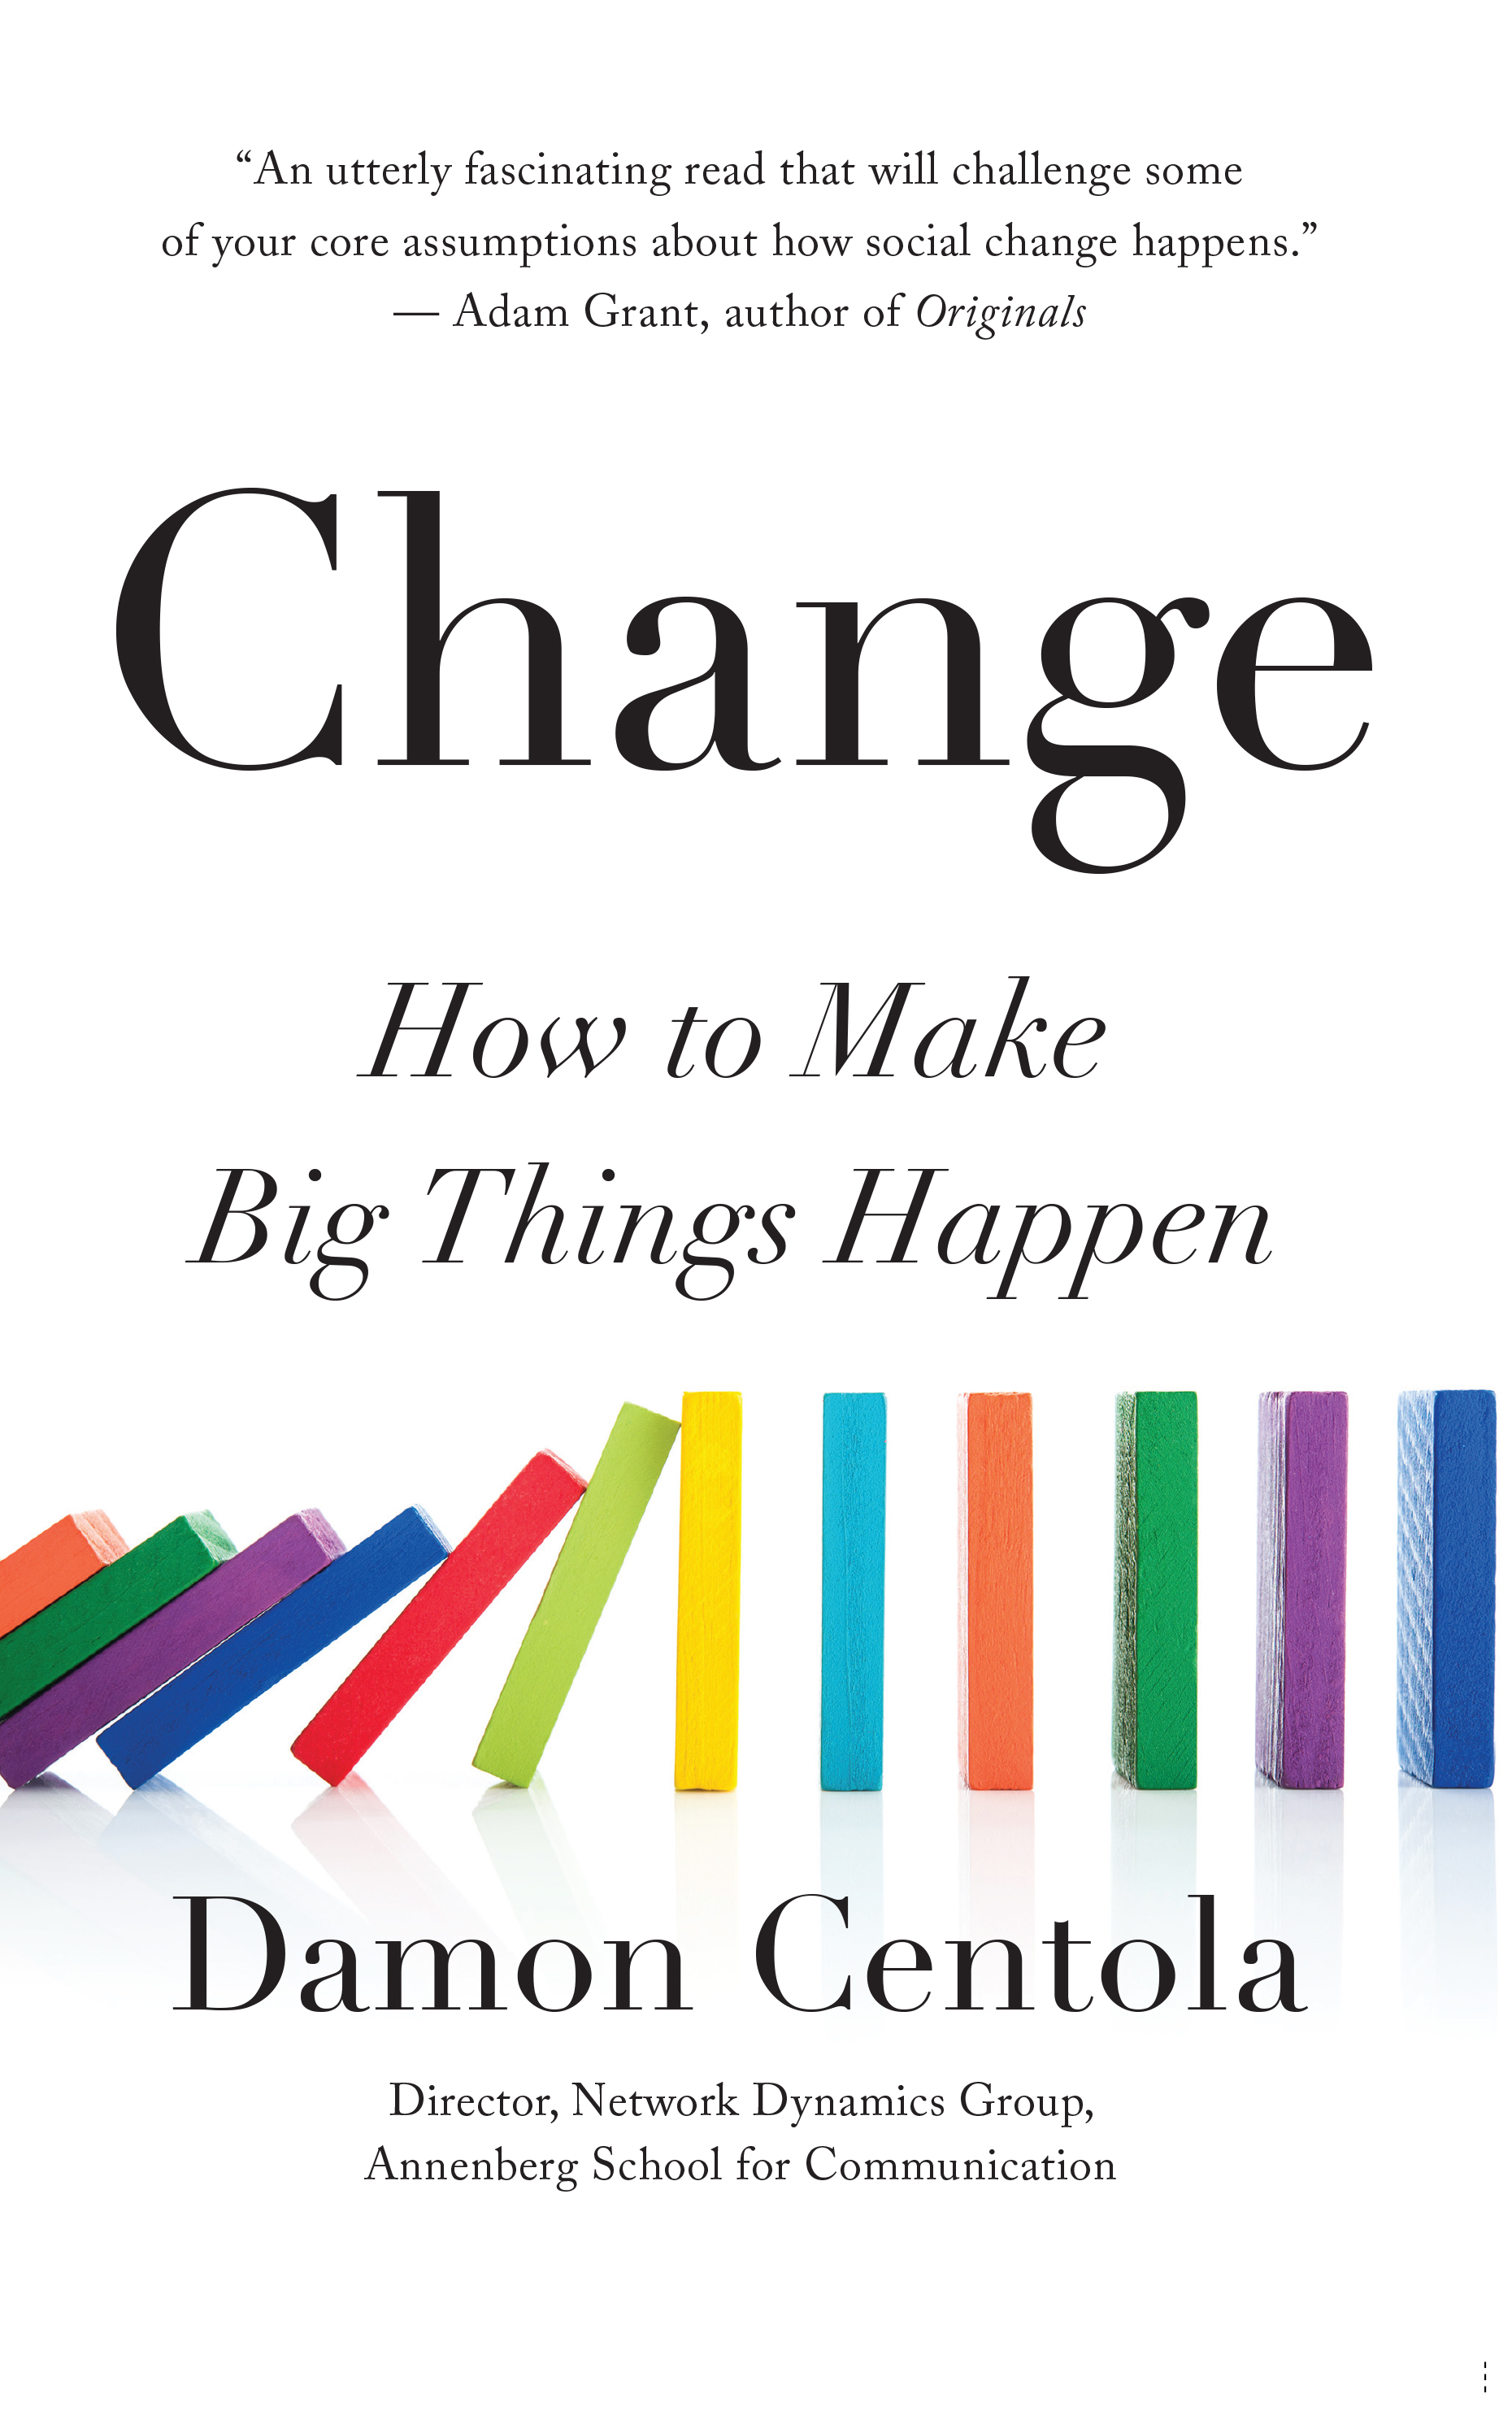 A book cover with colored dominoes started to fall. The book is called "Change: How to Make Big Things Happen" by "Damon Centola, Director, Network Dynamics Group, Annenberg School for Communication." At the top is a quote that reads, "An utterly fascinating read that will challenge some of your core assumptions about how social change happens. Adam Grant, author of Originals"